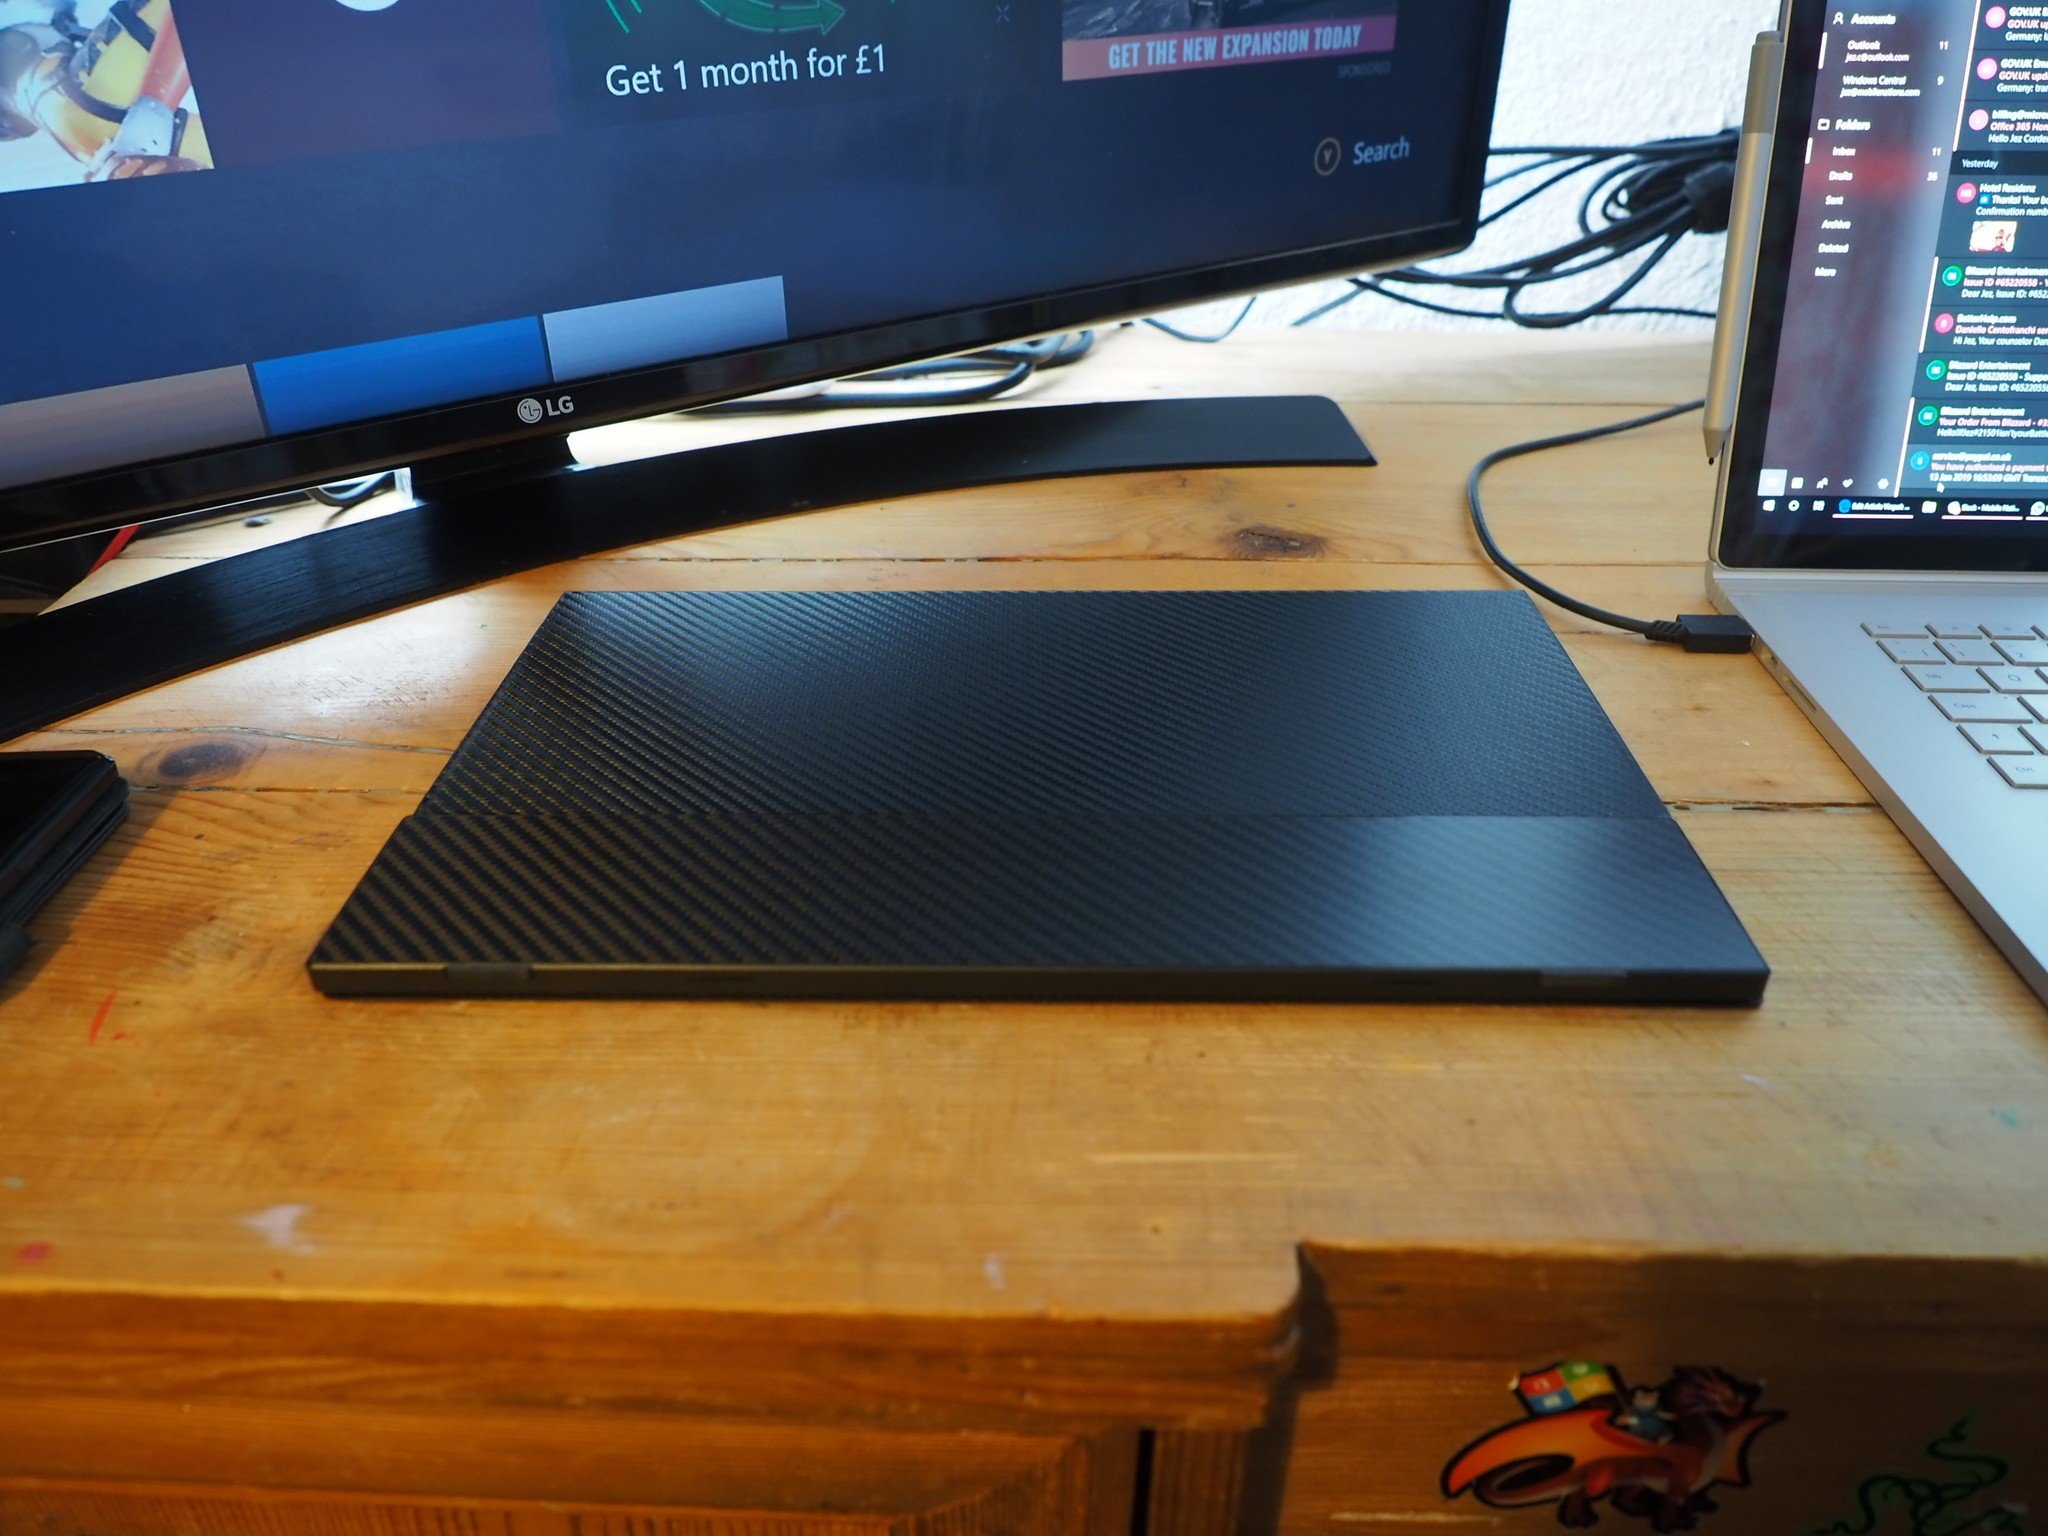 Vinpok Split review: Game on the go with this premium external 